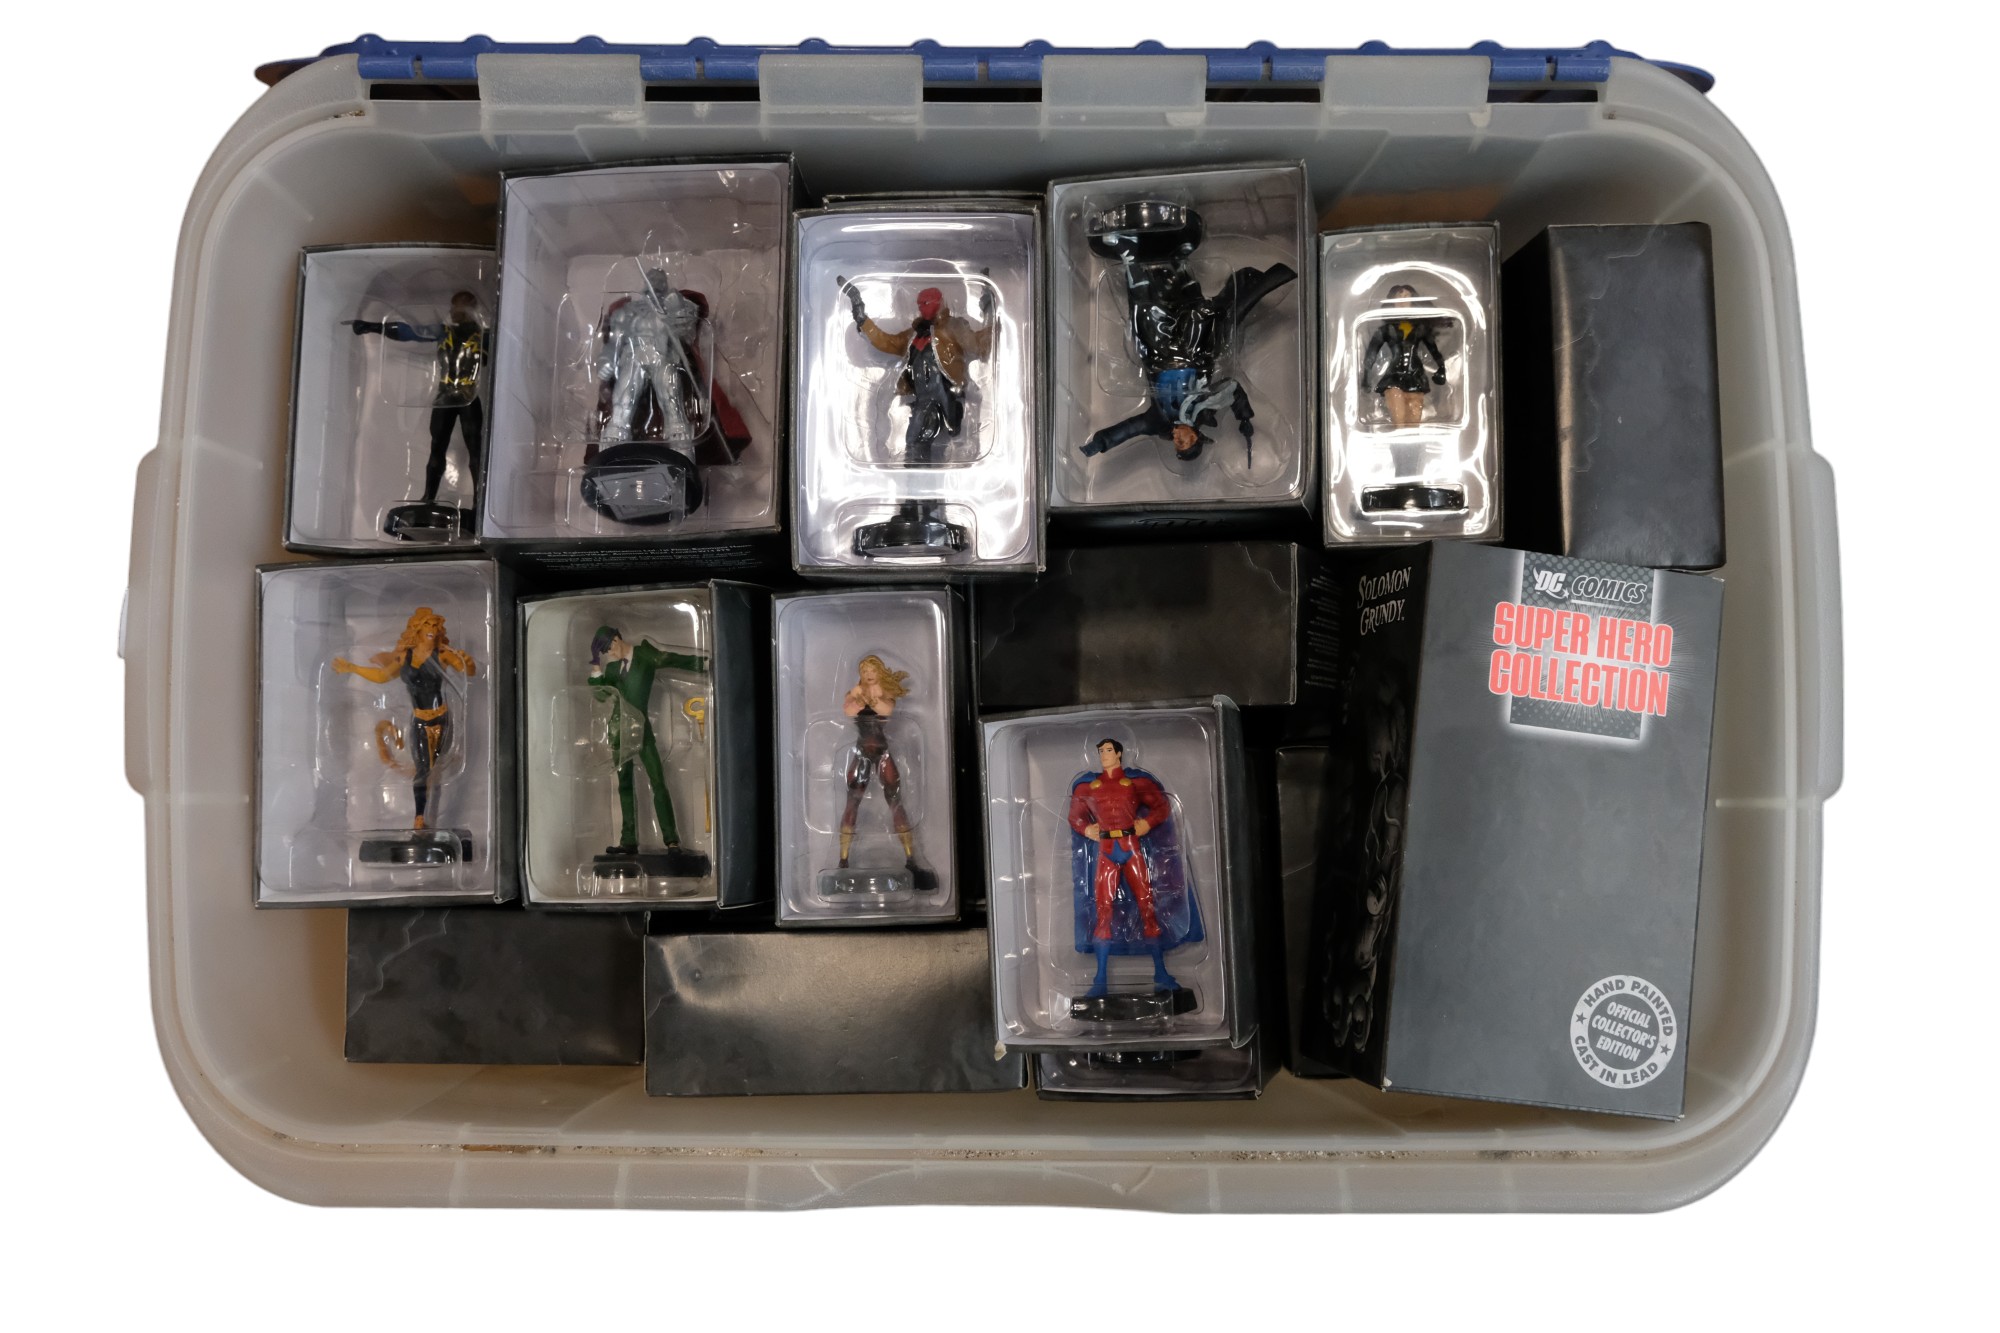 "DC Comics Super Hero Collection", a complete set of 120 figurines and magazines by Eaglemoss - Image 8 of 9